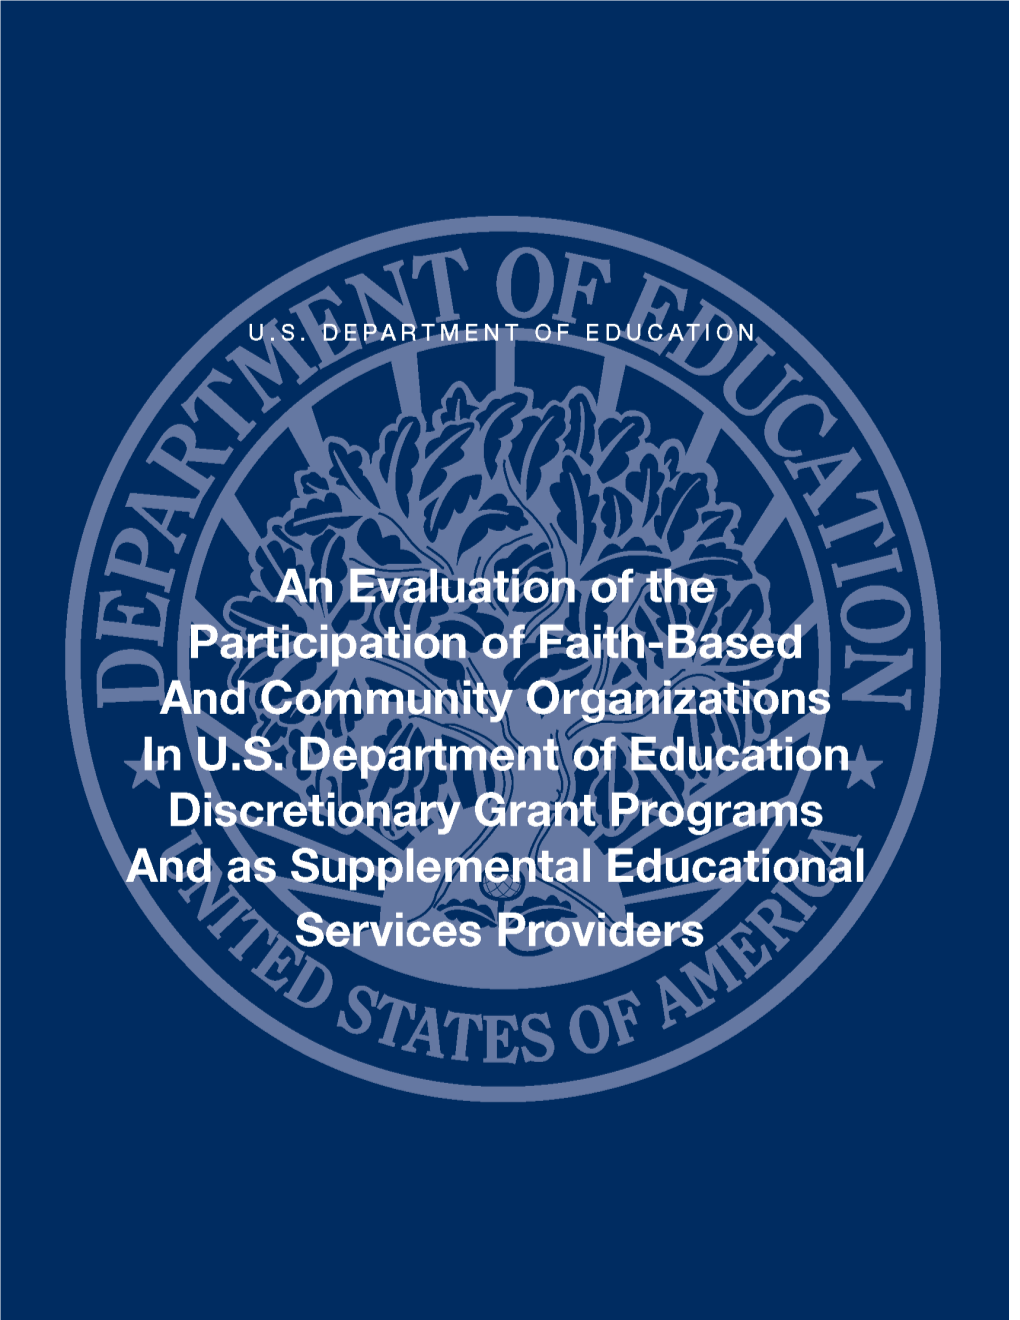 An Evaluation of the Participation of Faith-Based and Community Organizations in U.S. Department